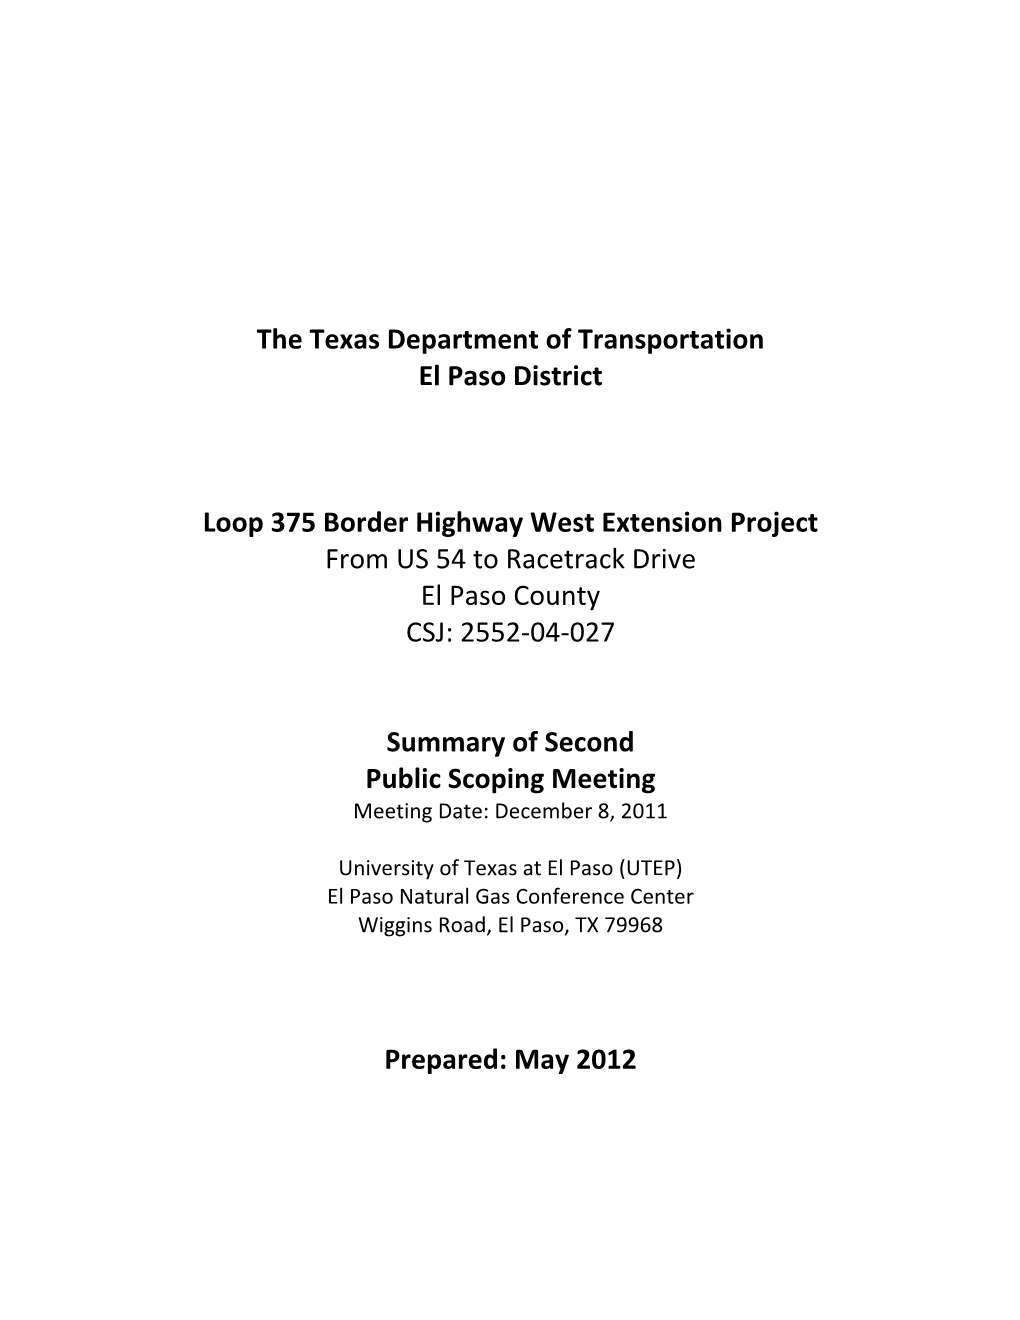 The Texas Department of Transportation El Paso District Loop 375 Border Highway West Extension Project from US